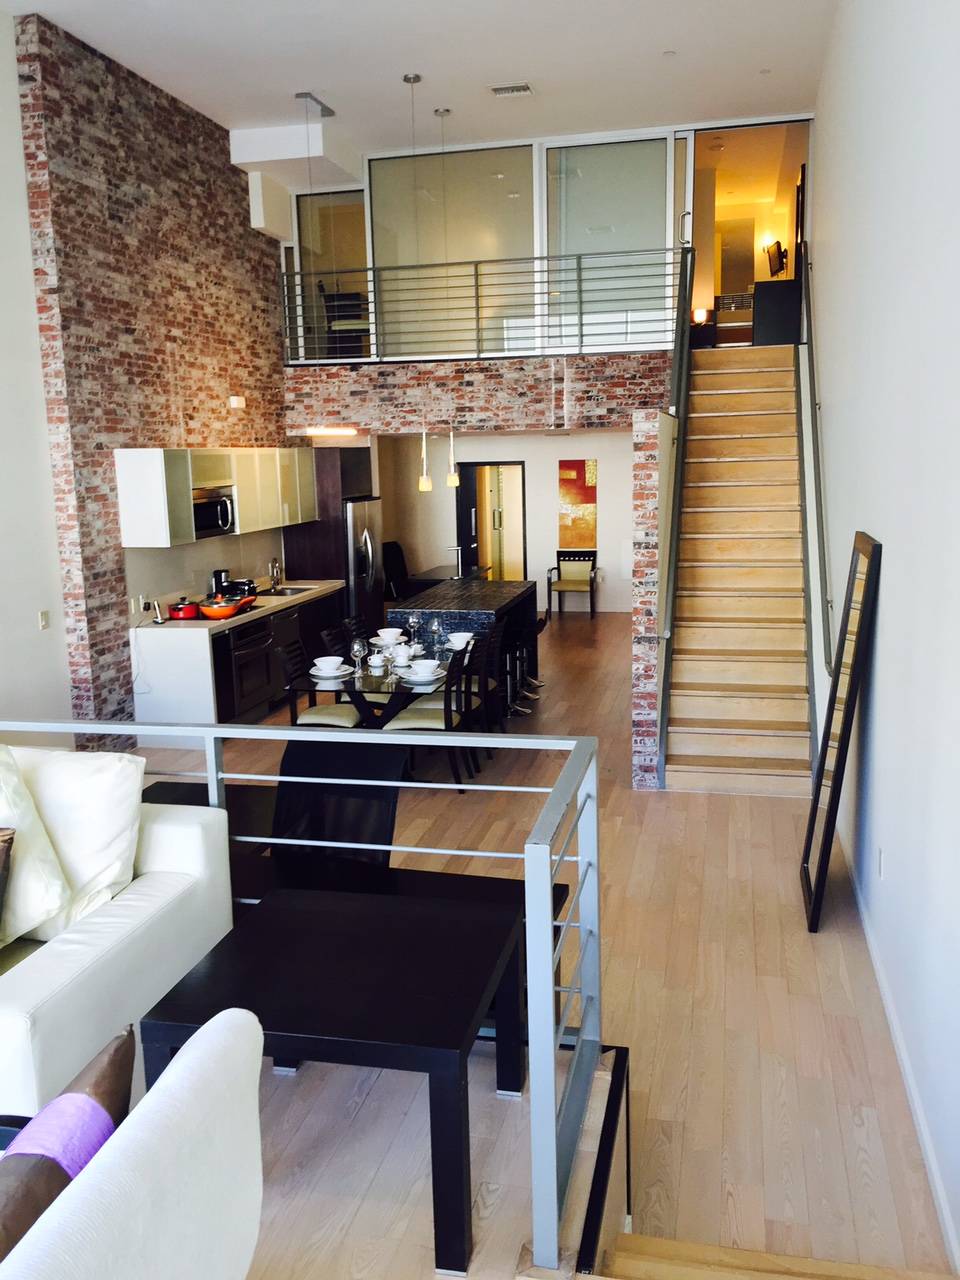 EXECUTIVE LOFT & STOREFRONT IN DTLA, TENTEN, A NEW LIFESTYLE SOLUTION FOR PROFESSIONALS WANTING TO LIVE, WORK, AND PLAY